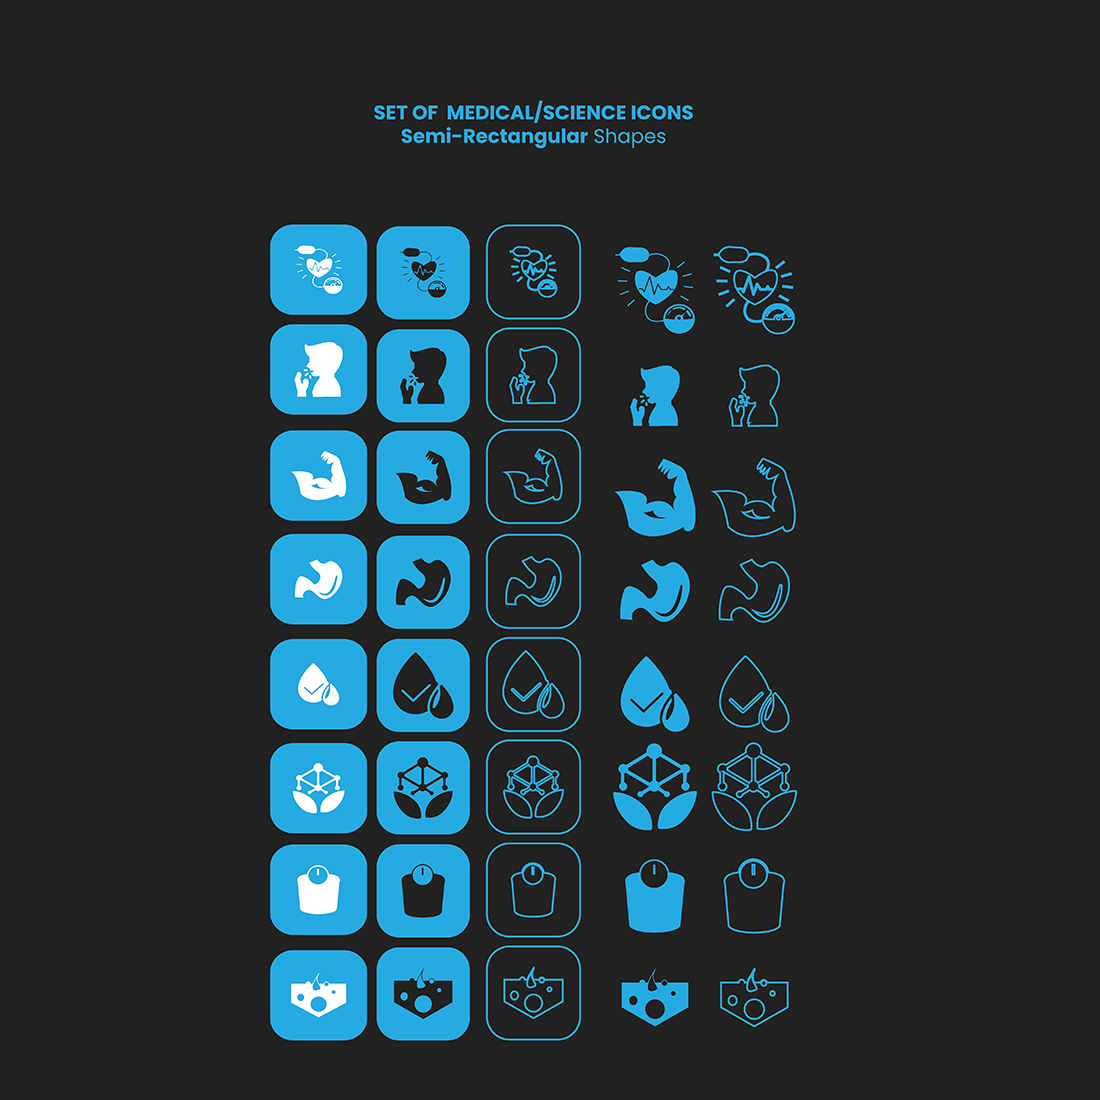 35 Science and Health Icons Bundle, blue icons square shape.